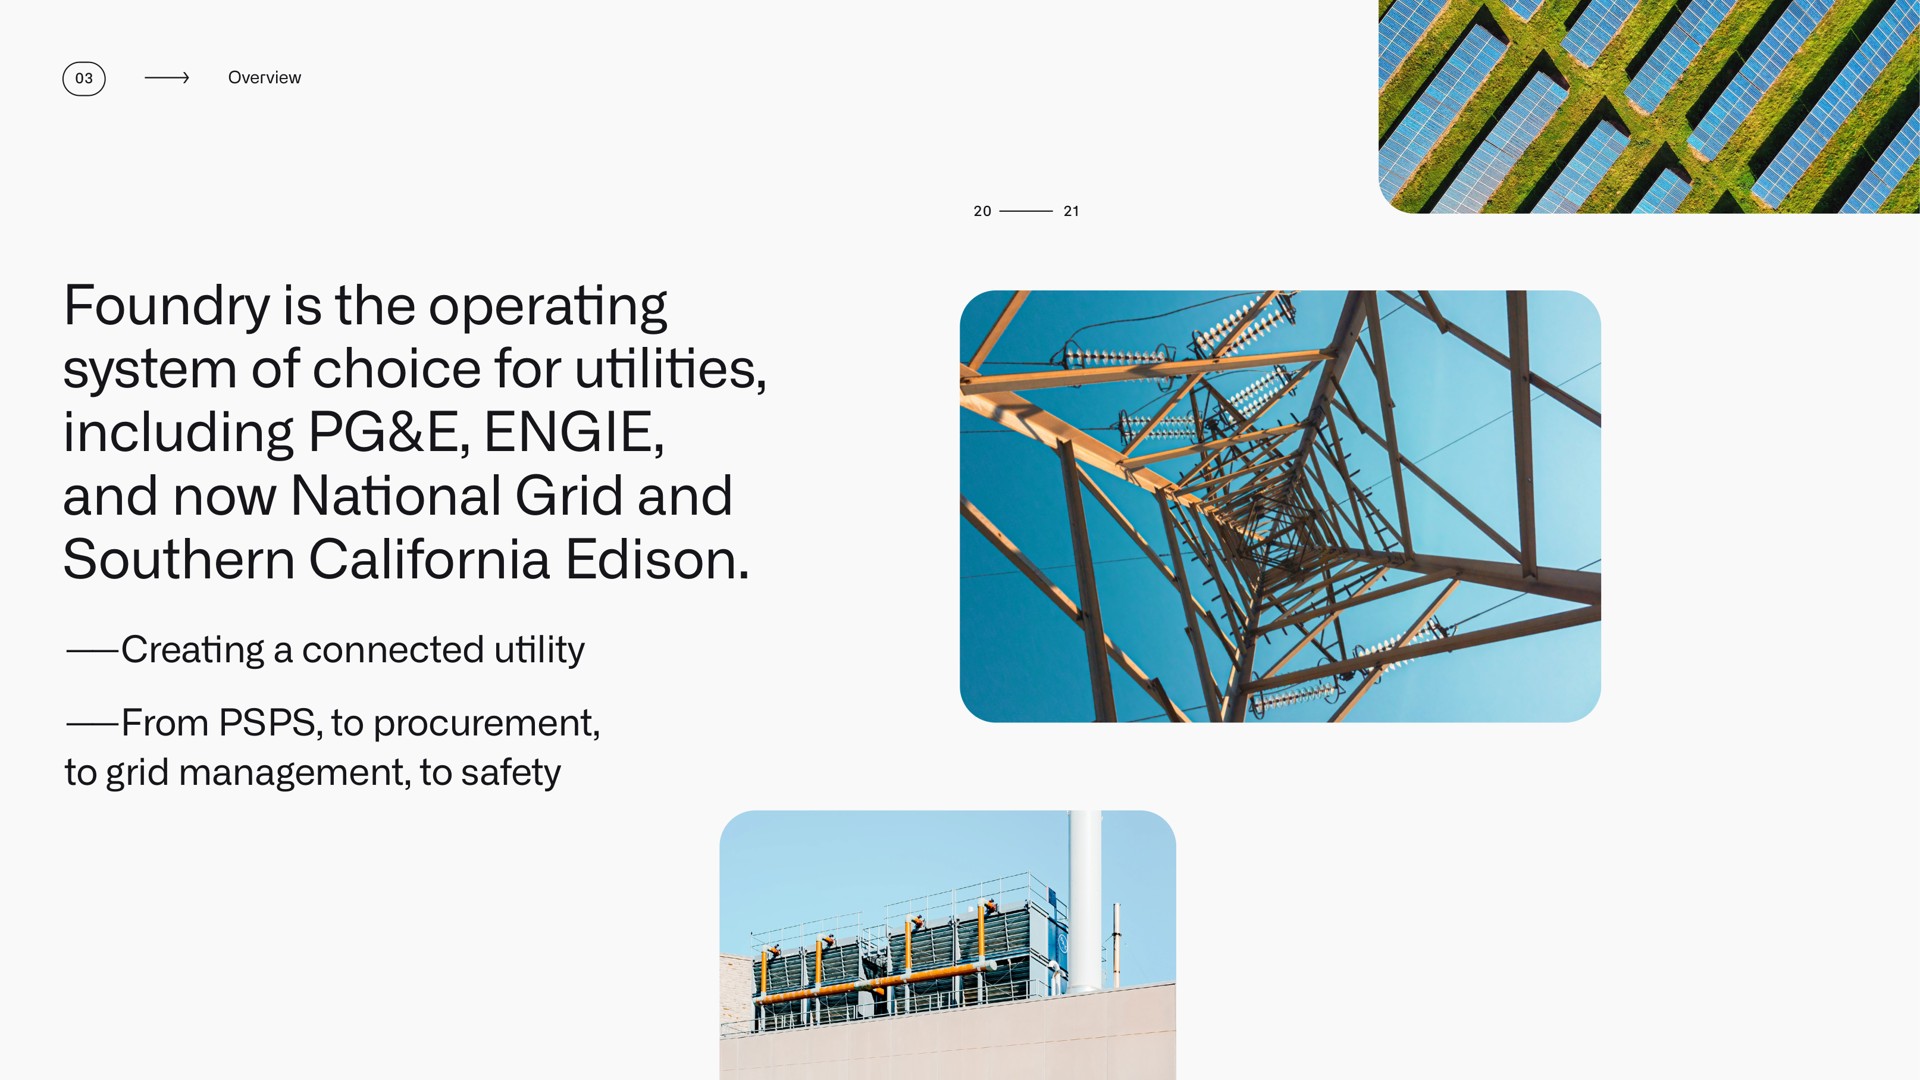 foundry is the operating system of choice for utilities including and now national grid and southern crea a connected from to procurement to grid management to safety creating utility | Palantir